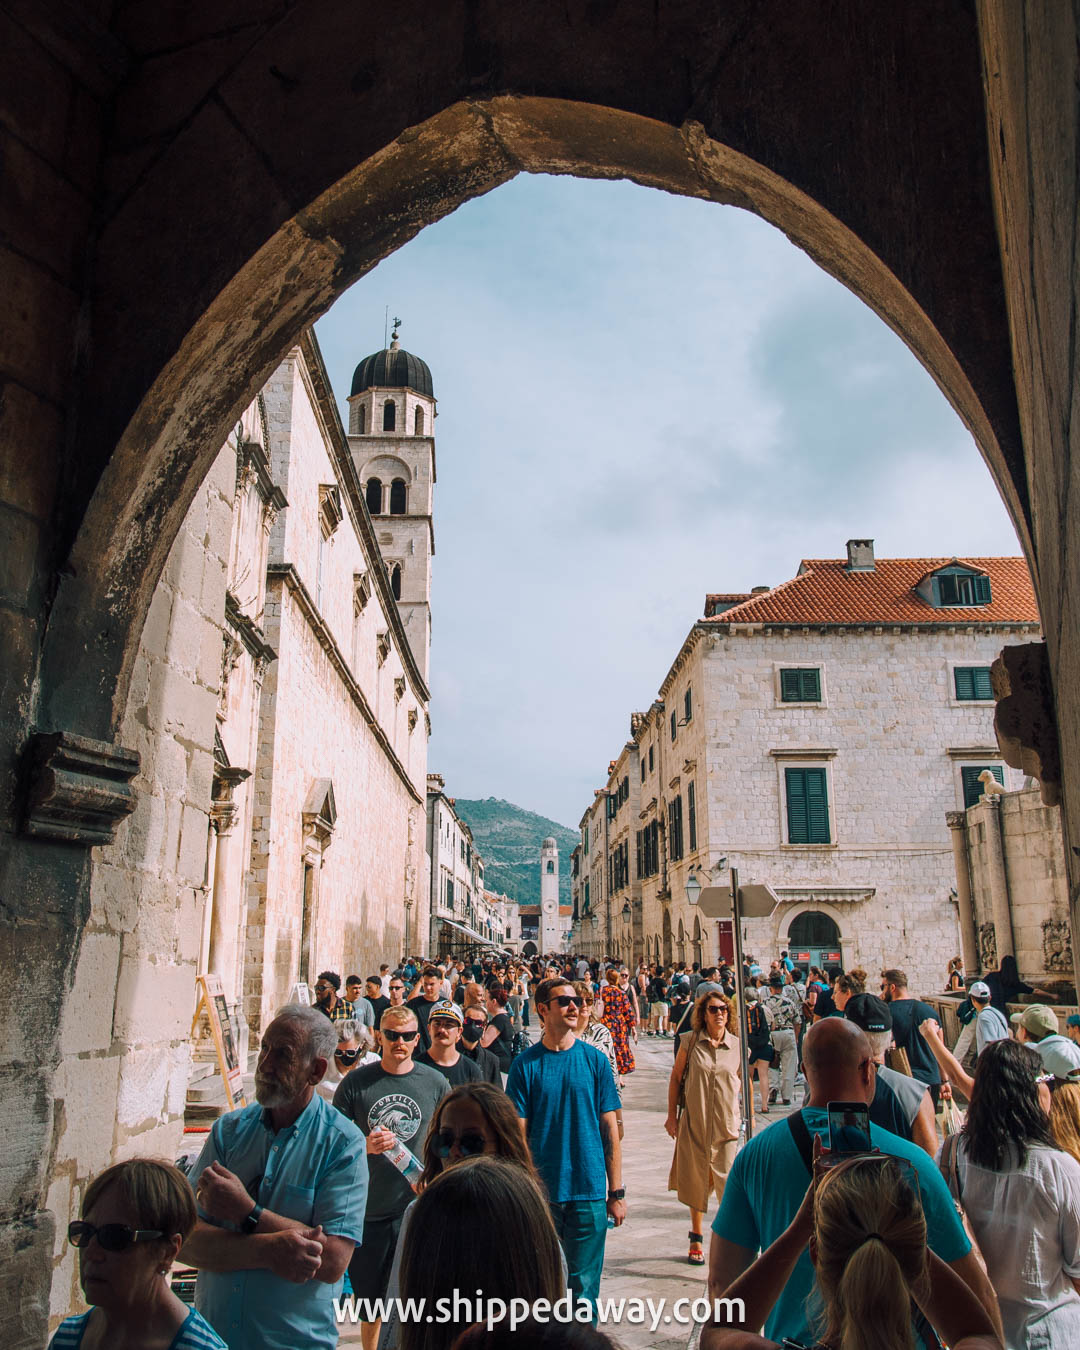 Where to stay in Dubrovnik - Best Dubrovnik Hotels - Best areas to stay in Dubrovnik - Where to stay in Dubrovnik on a budget - Best Dubrovnik resorts - Is it worth staying in Dubrovnik Old Town?